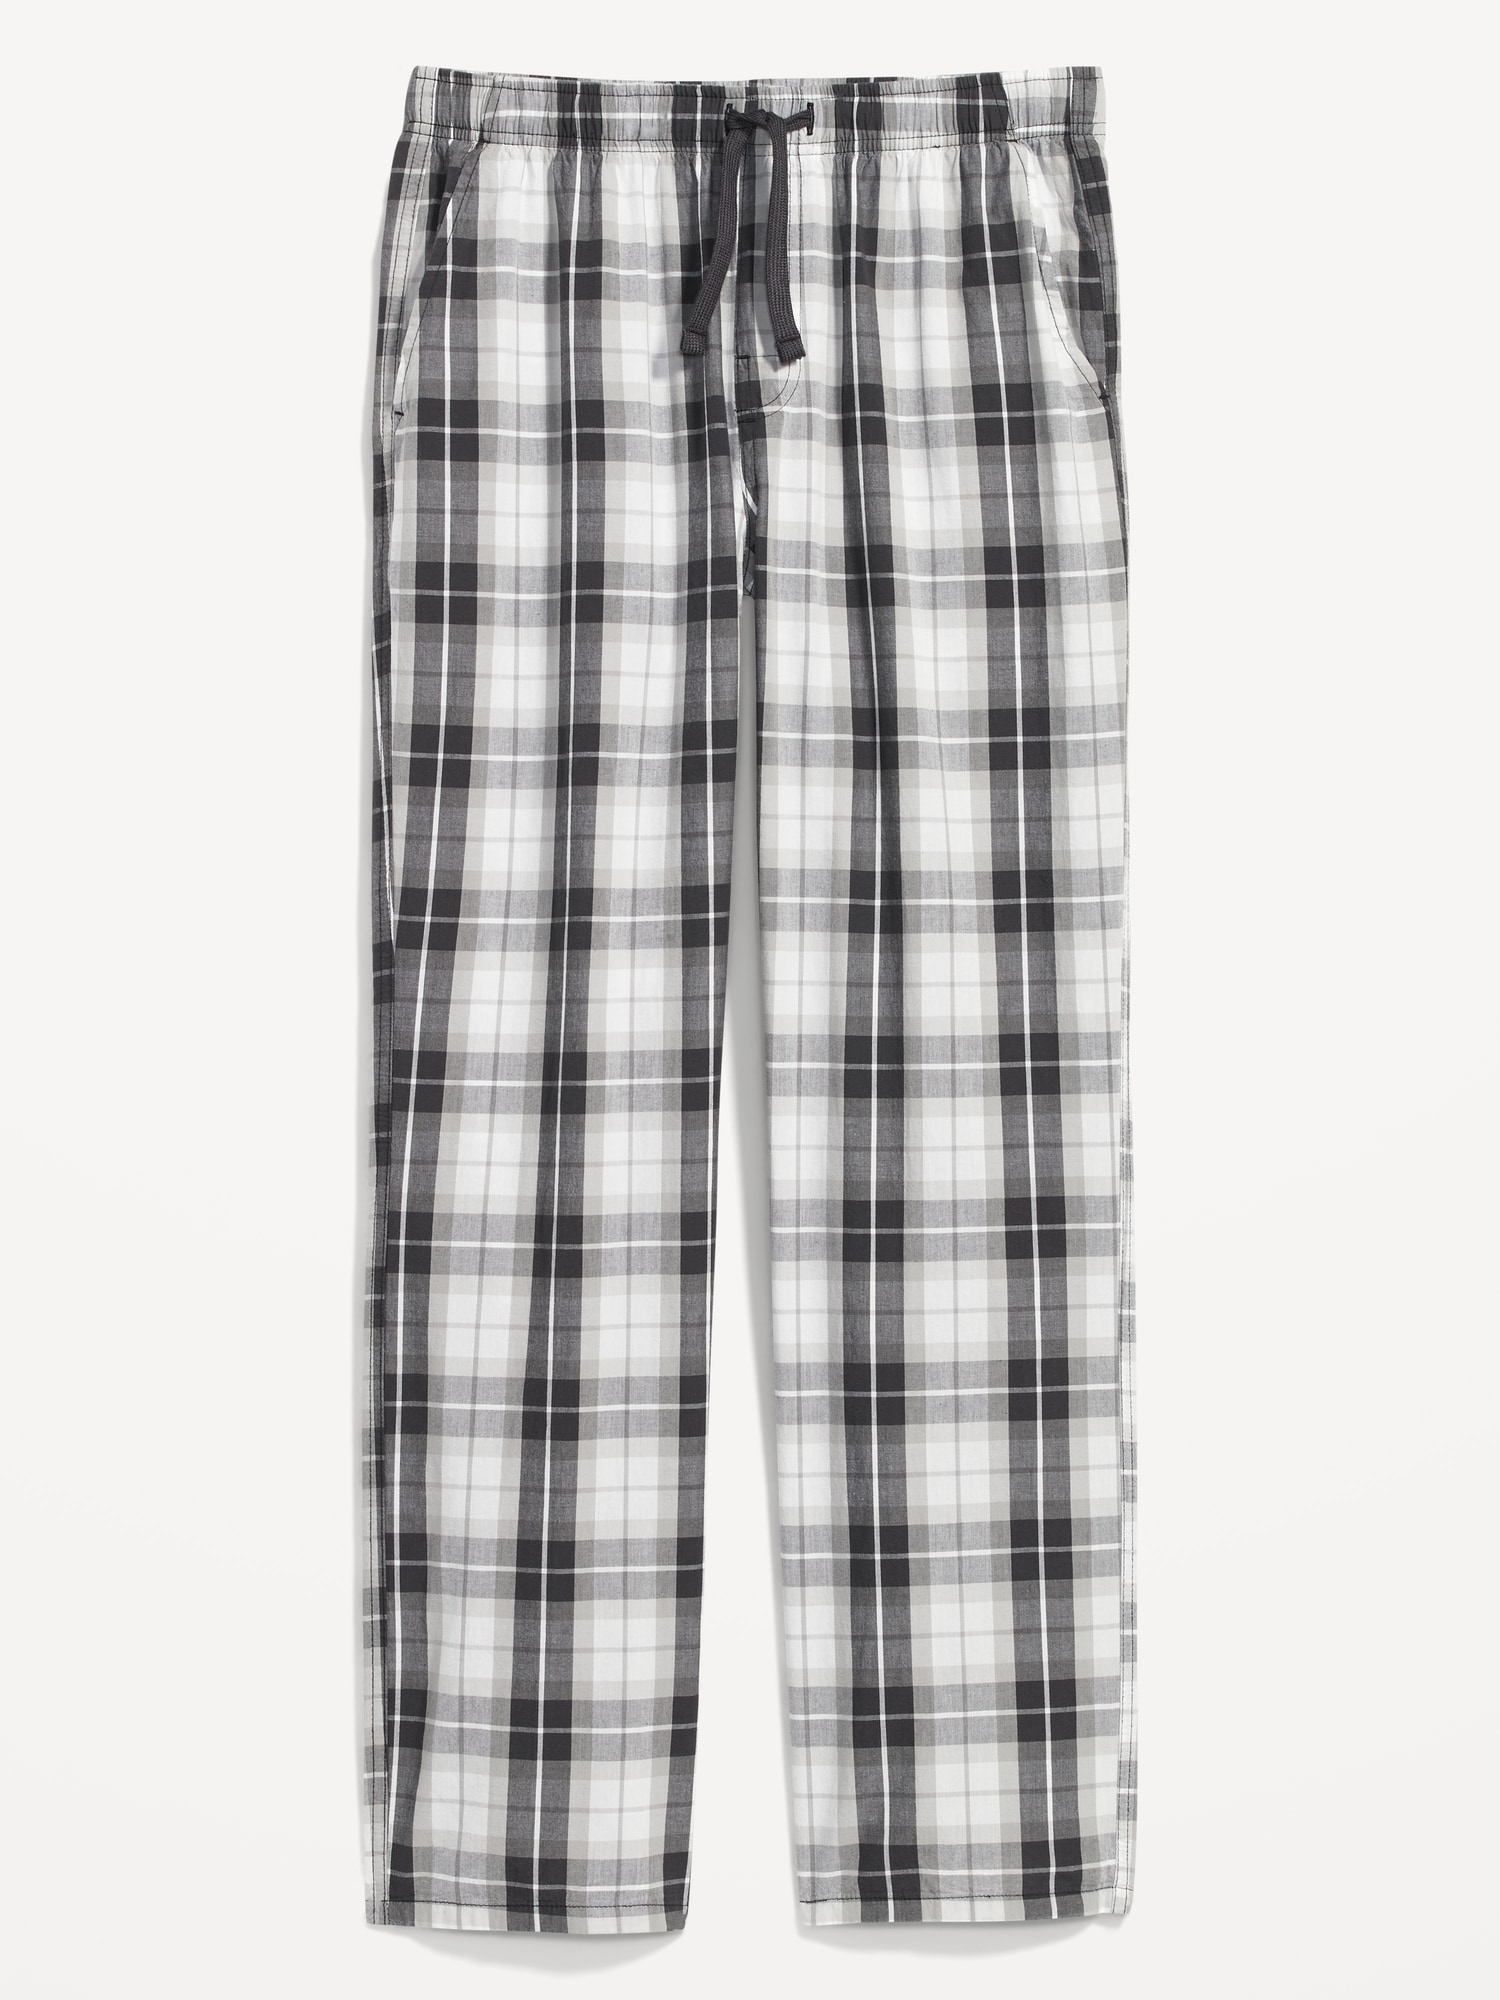 Discover more than 87 male pajama pants best - in.eteachers